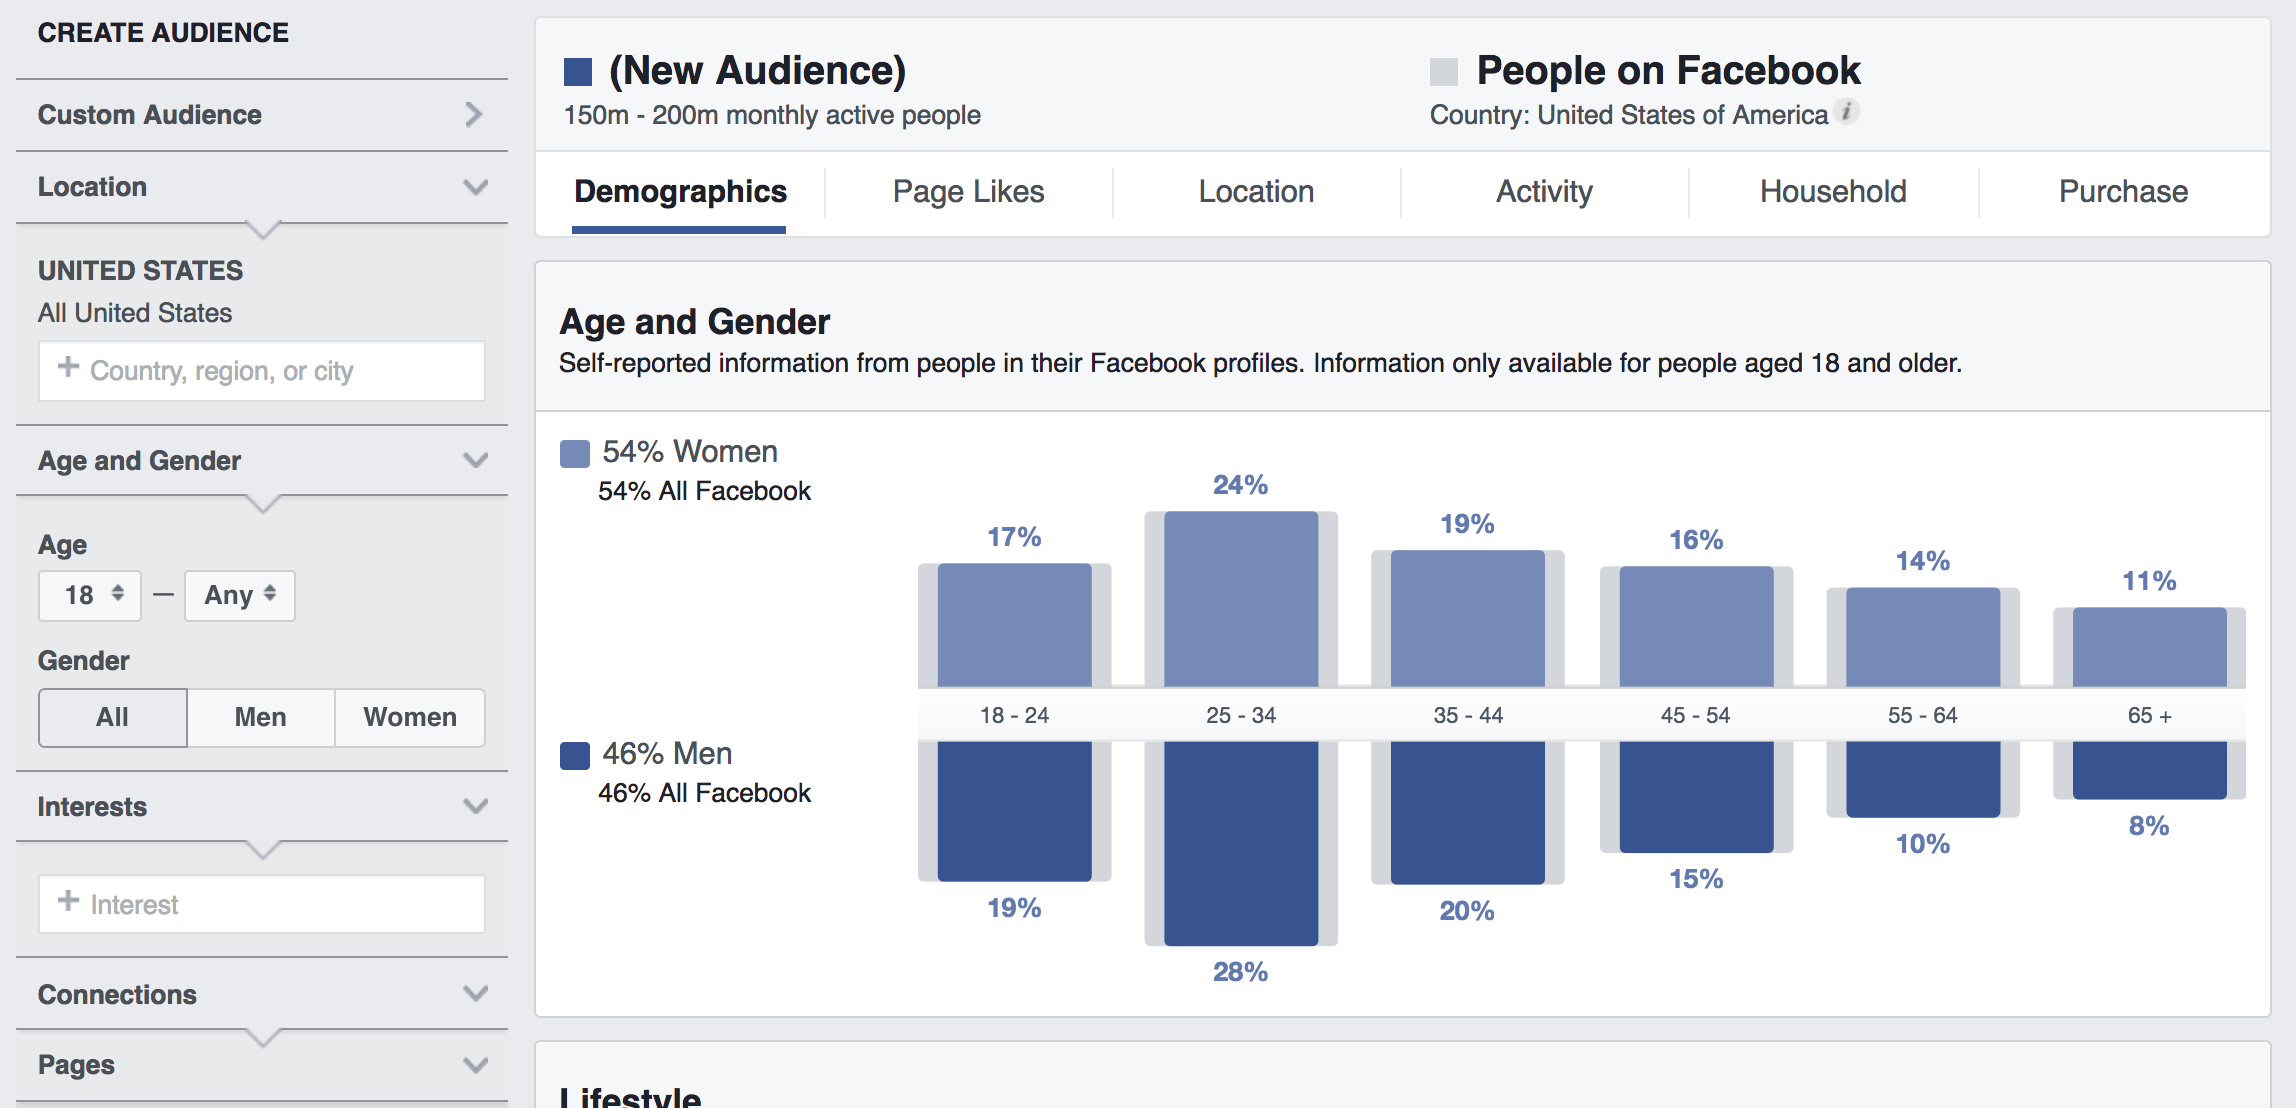 Depicted here is what would be shown if you visit Facebook.com/ads/audience-insights to access the Insights tool. Select “Everyone on Facebook” from the initial options; this ensures you can research Facebook audiences from scratch. Right away, you see data that represents all Facebook users; at the top, Facebook explains that the data you see represents all 150 to 200 million monthly active Facebook users in the United States.